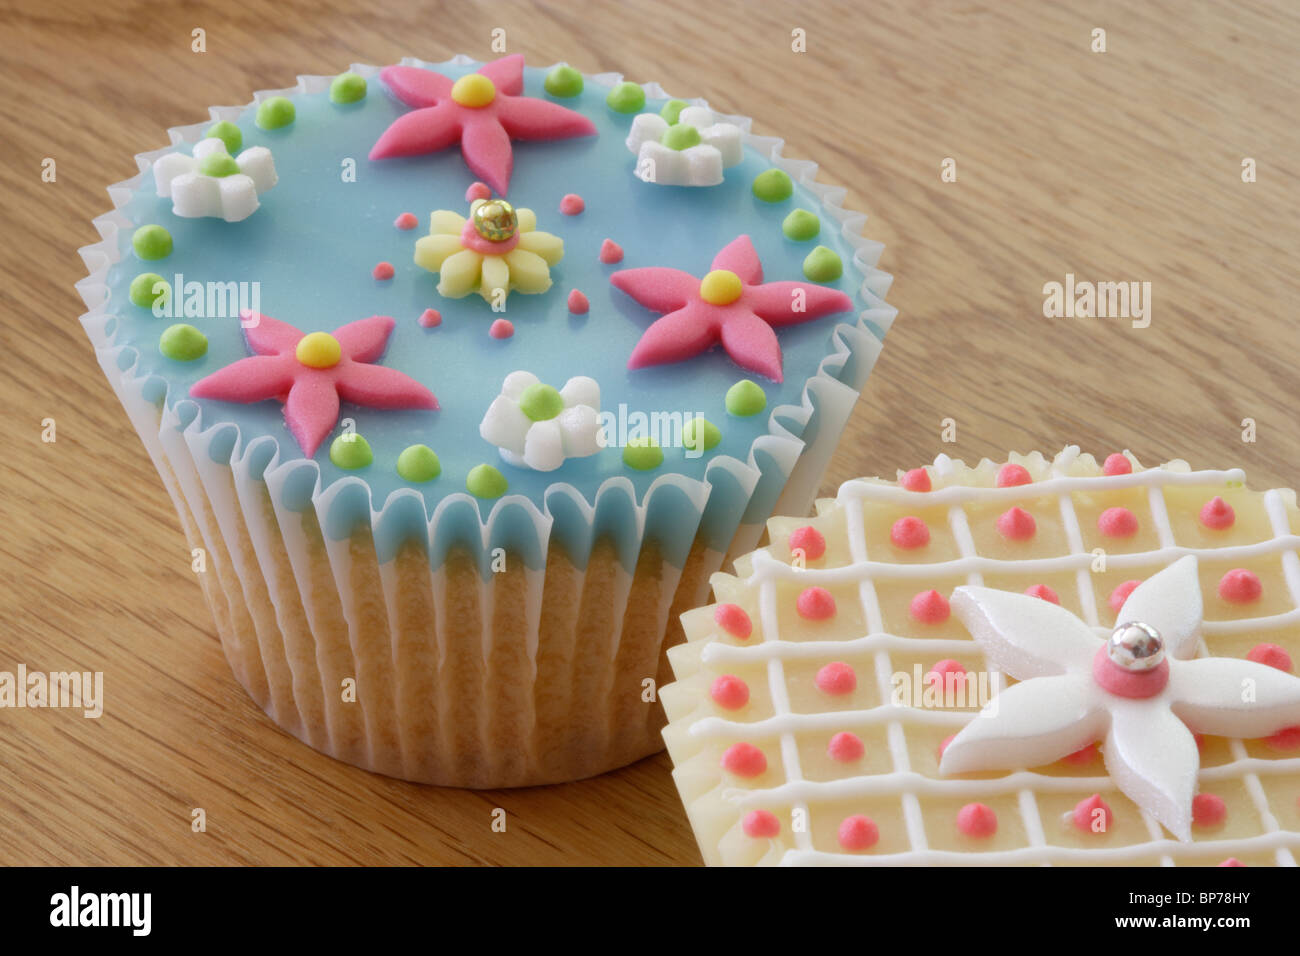 highly decorated cupcakes or fairy cakes Stock Photo